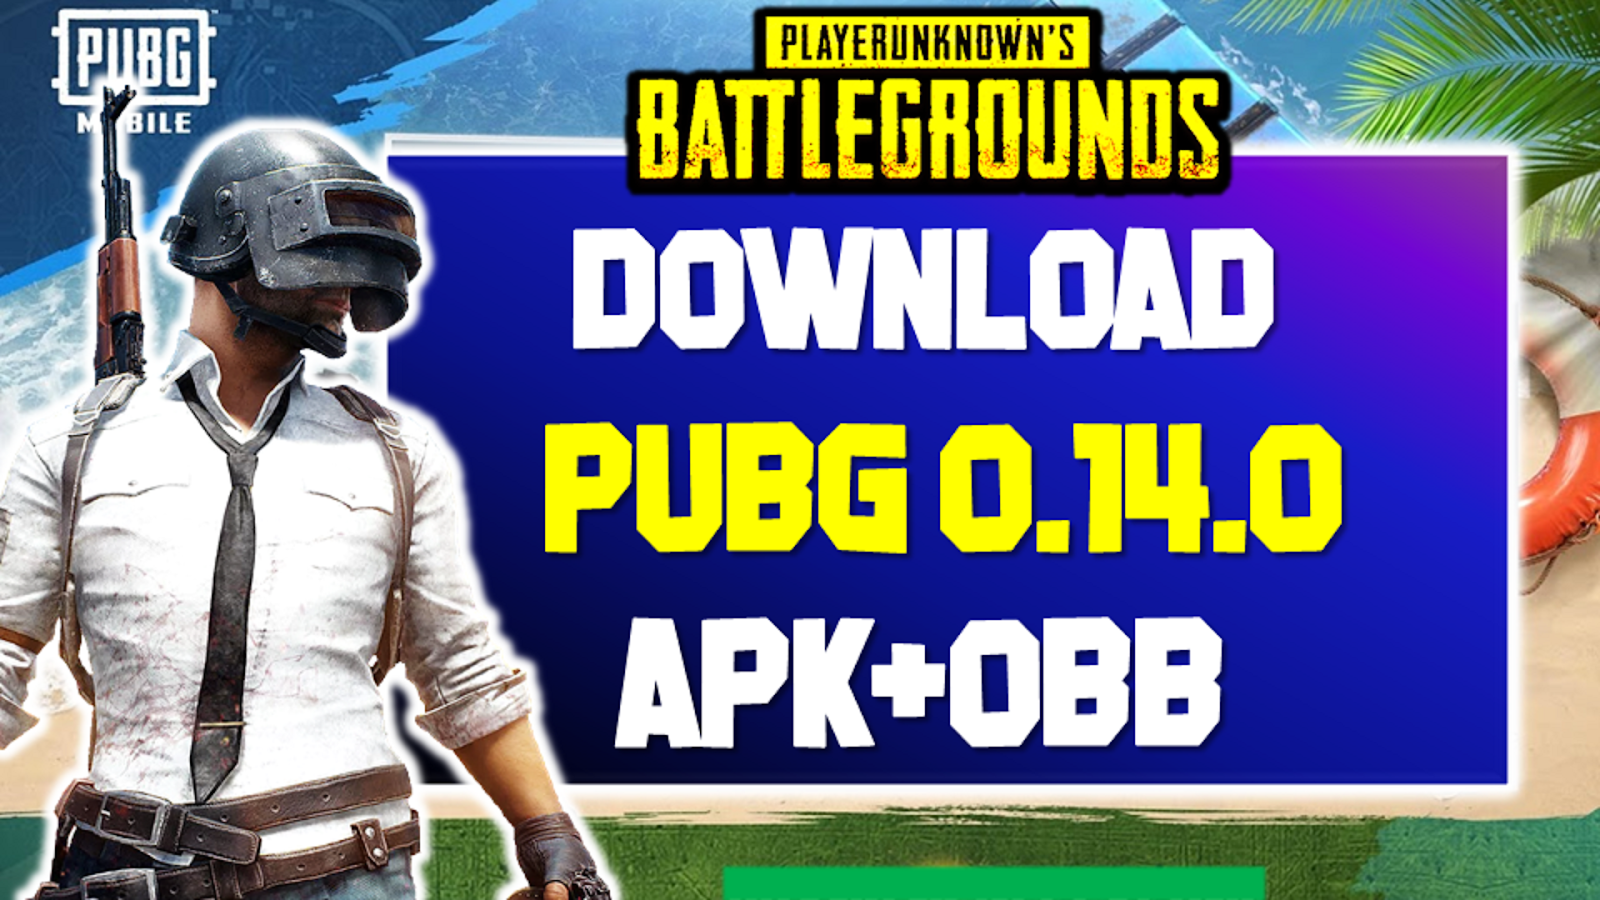 Downloading obb service is running pubg фото 3